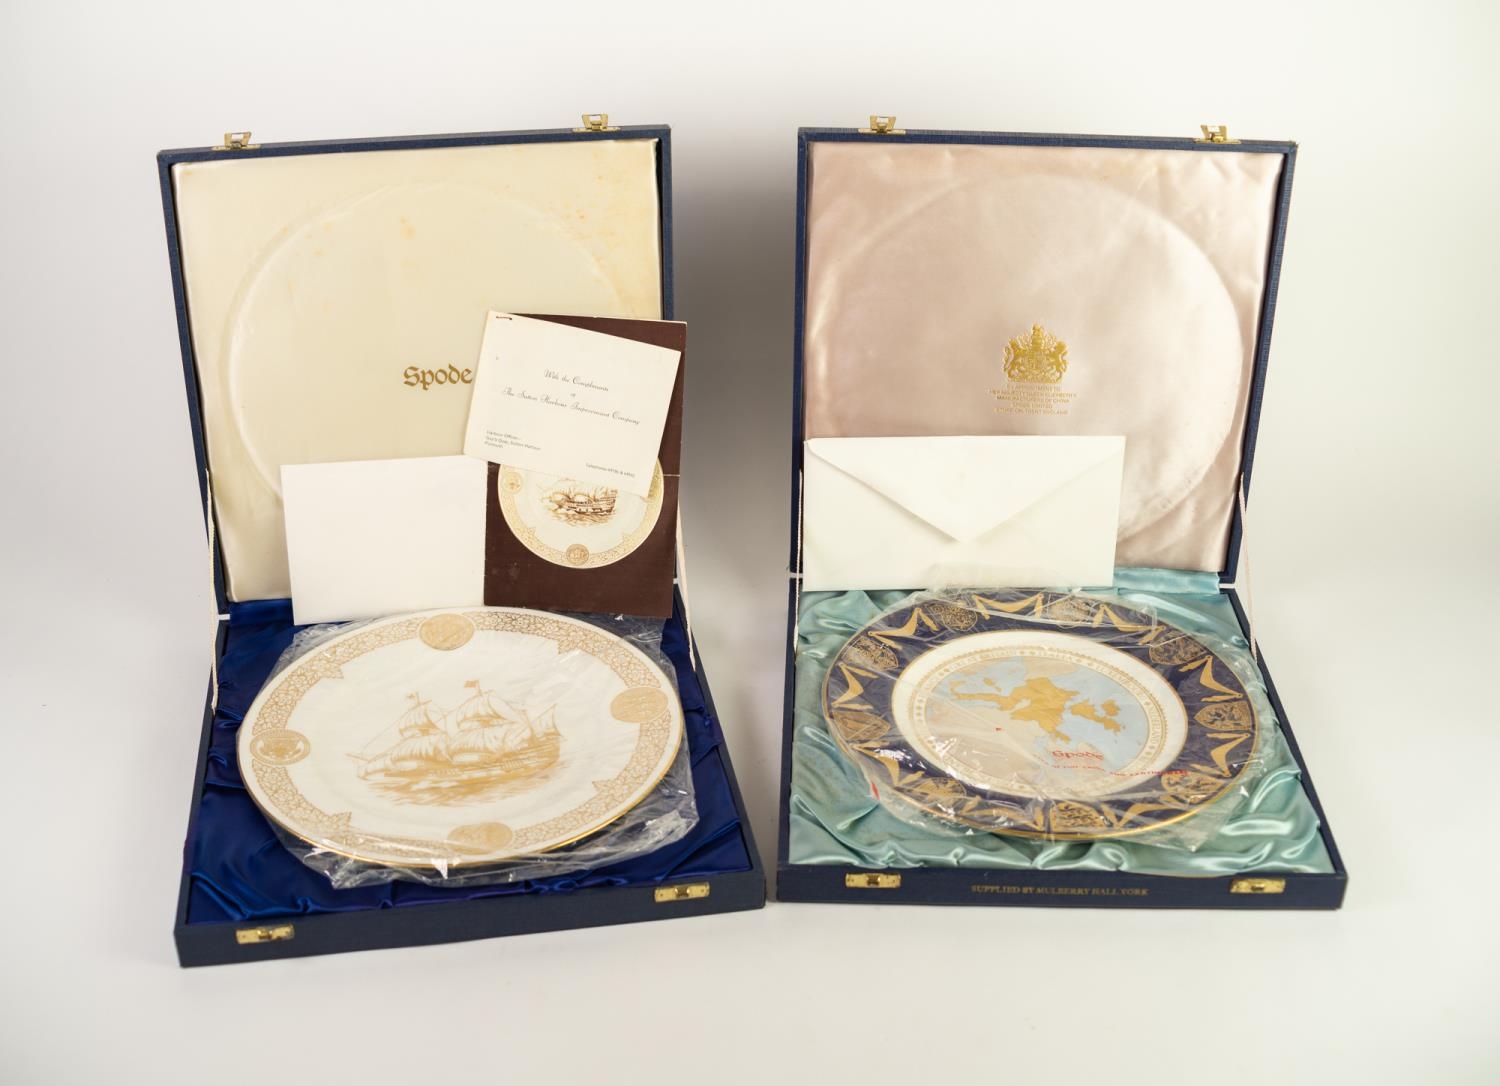 BOXED SPODE CHINA LIMITED EDITION PLATE, 350th ANNIVERSARY OF MAYFLOWER SAILING, 10 1/2" (26.7cm)